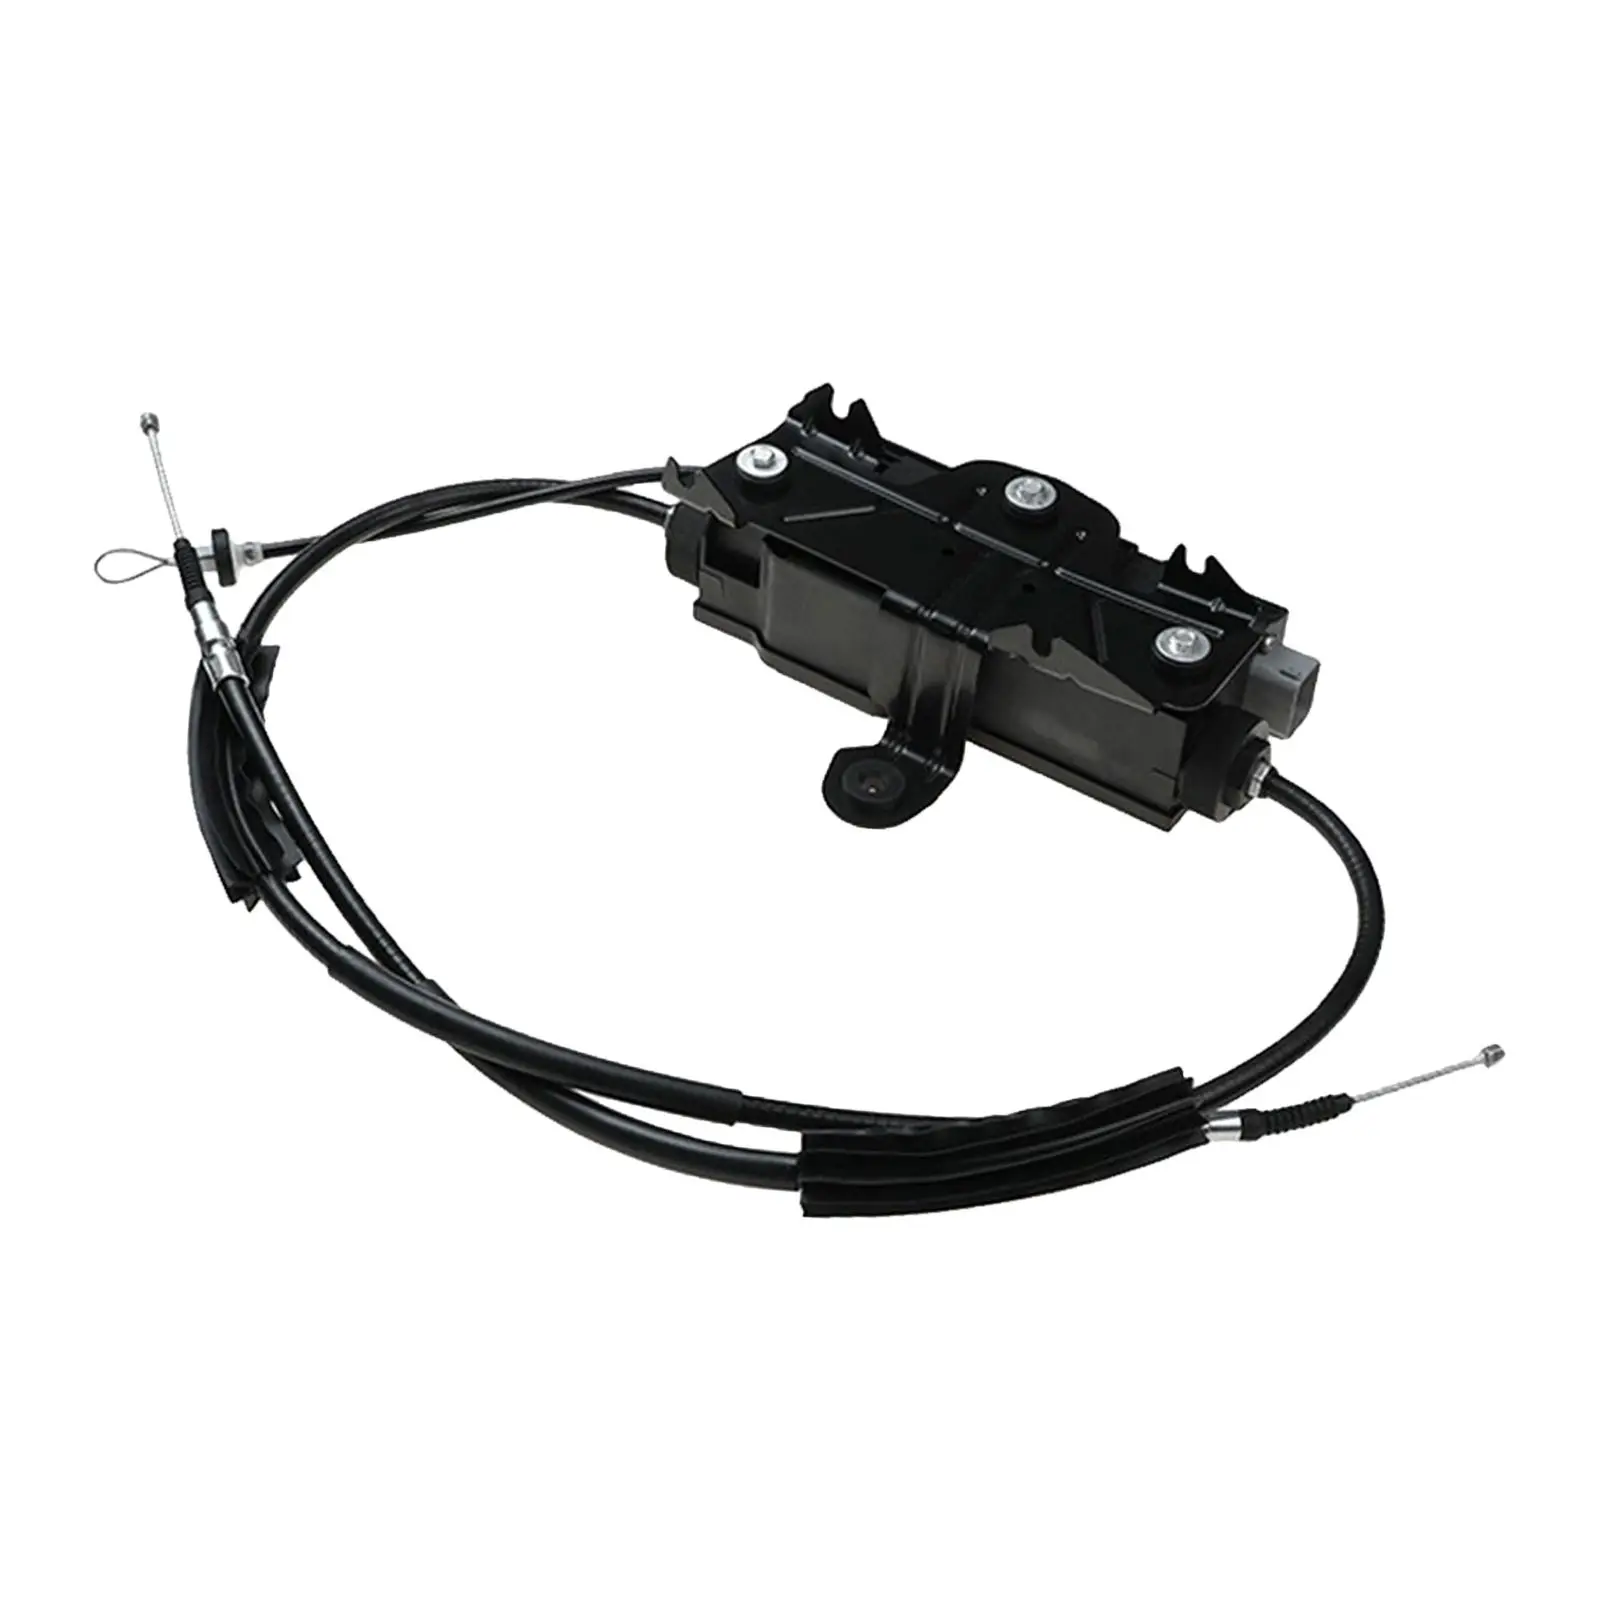 Park Brake Module, Parking Brake Actuator With Control Unit Fit for BMW 7 Series F01 F02 F03 34436877316